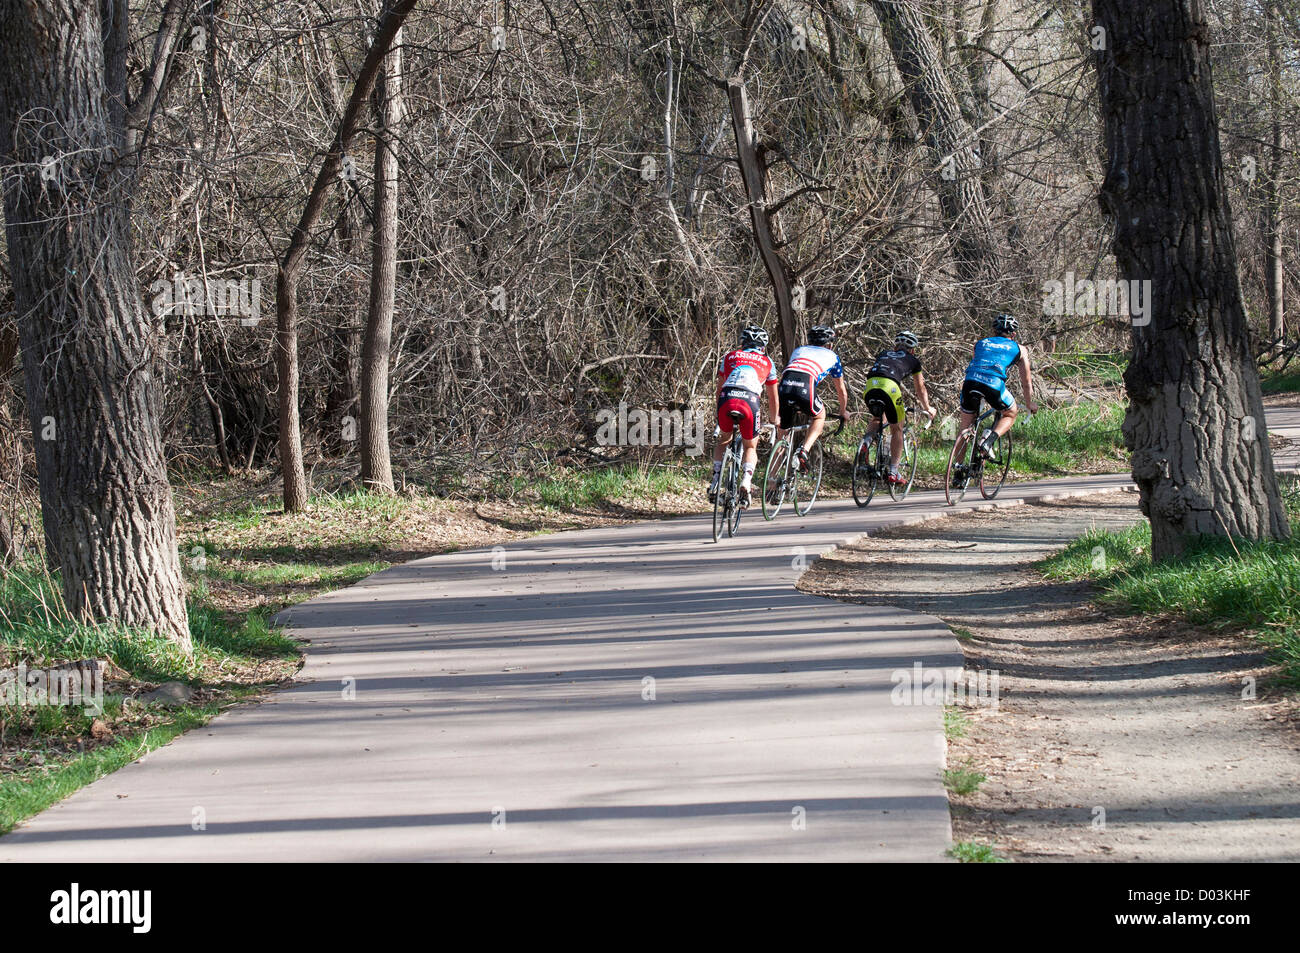 USA, CO, Fort Collins. Extensive bike path system throughout Fort Collins. Here group of cyclists on Poudre River Trail Stock Photo